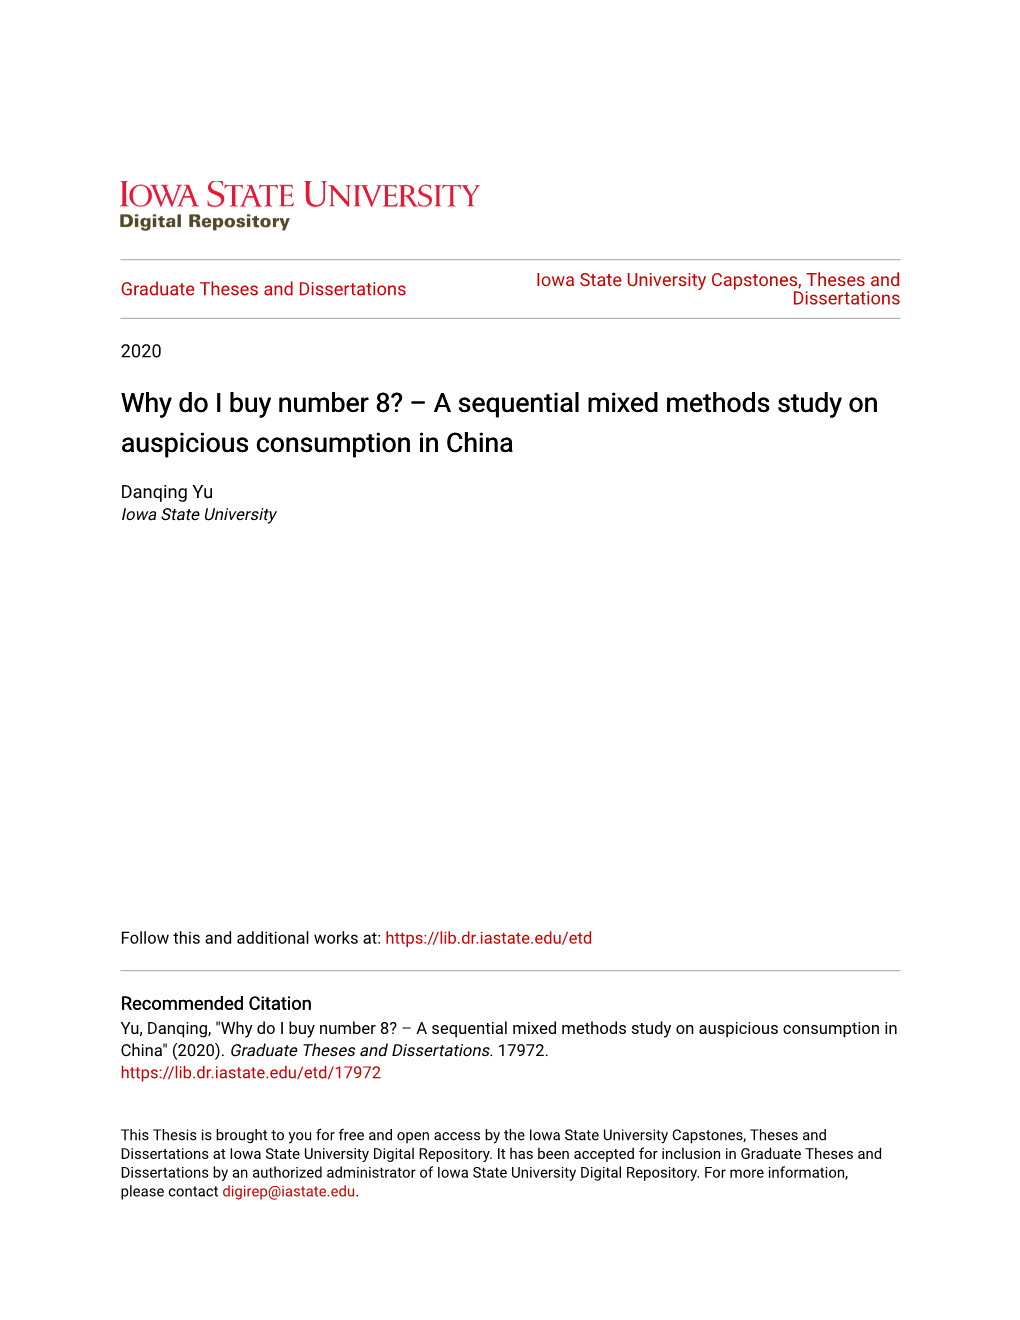 A Sequential Mixed Methods Study on Auspicious Consumption in China